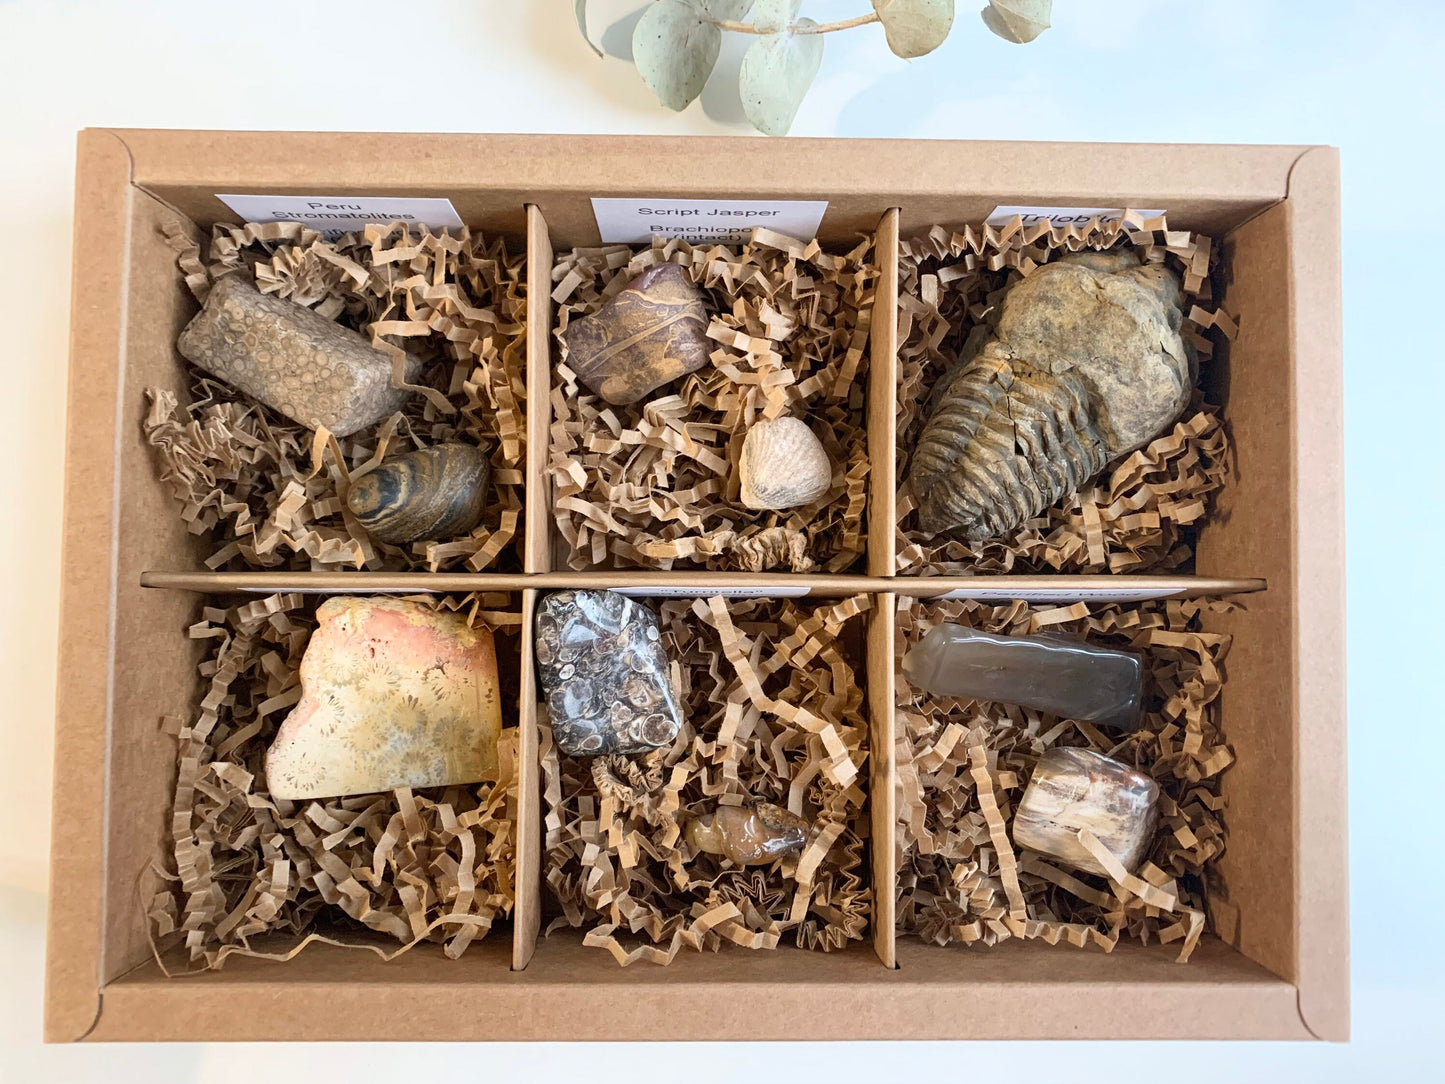 Fossil collection kit (10 piece)